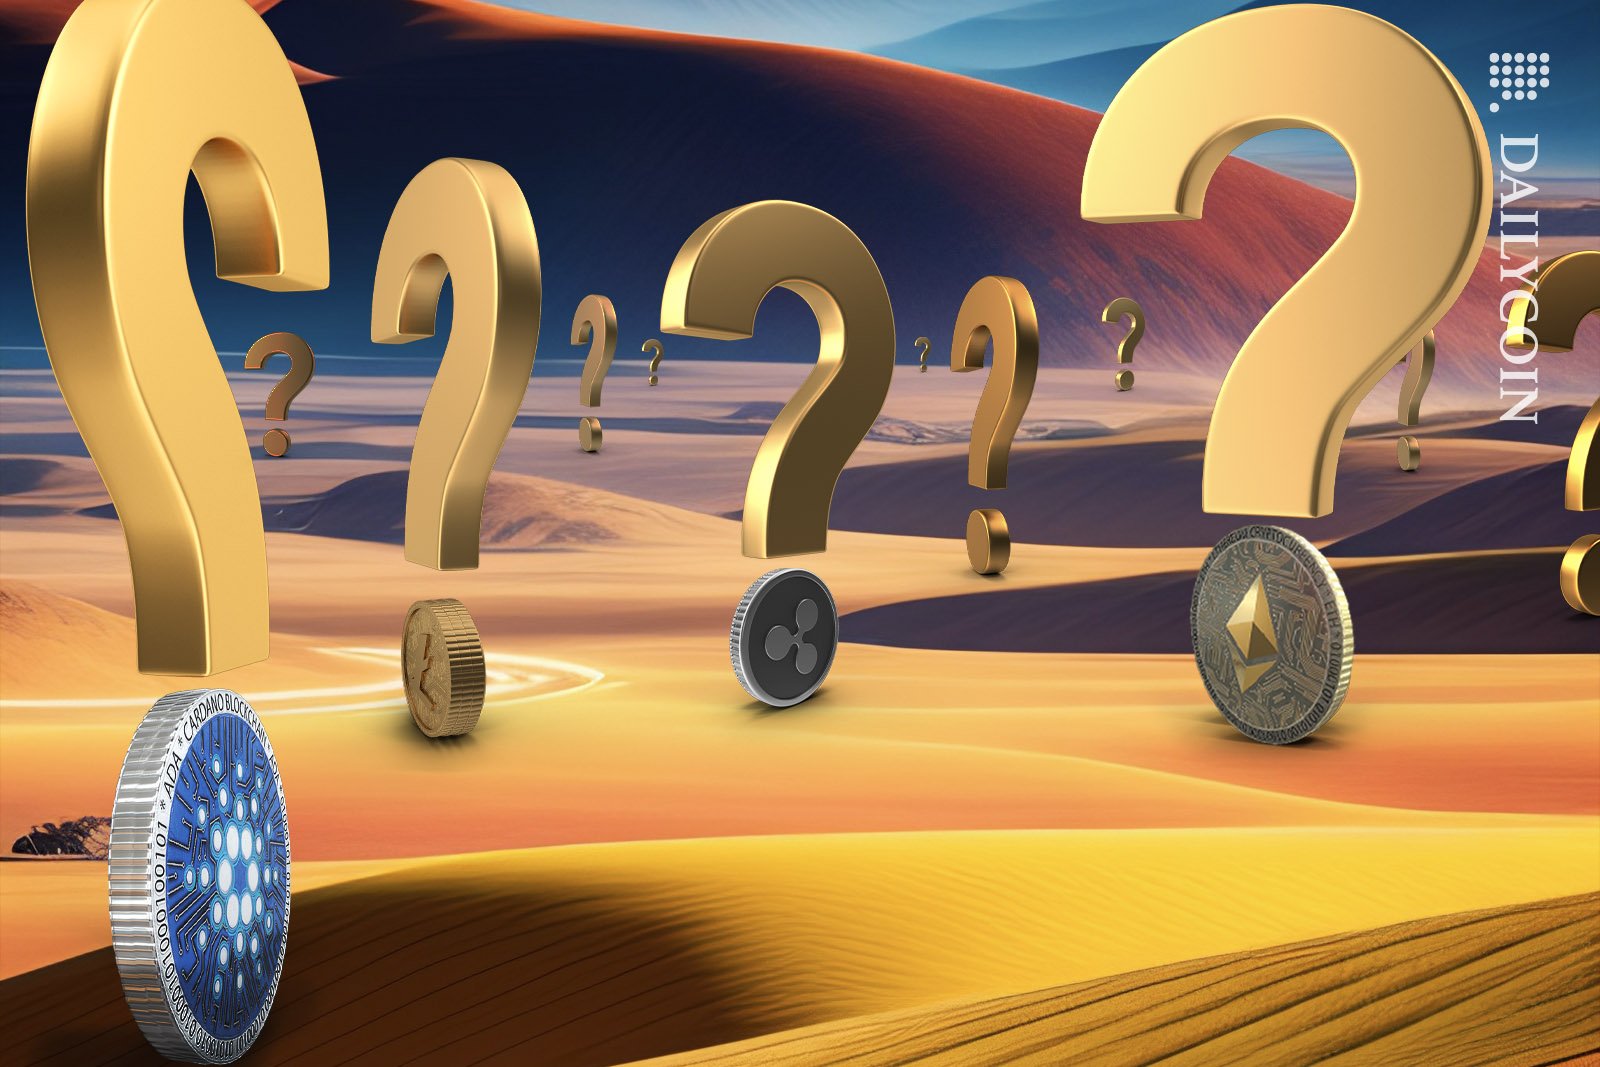 Lots of question marks and crypto coins standing in a desert.